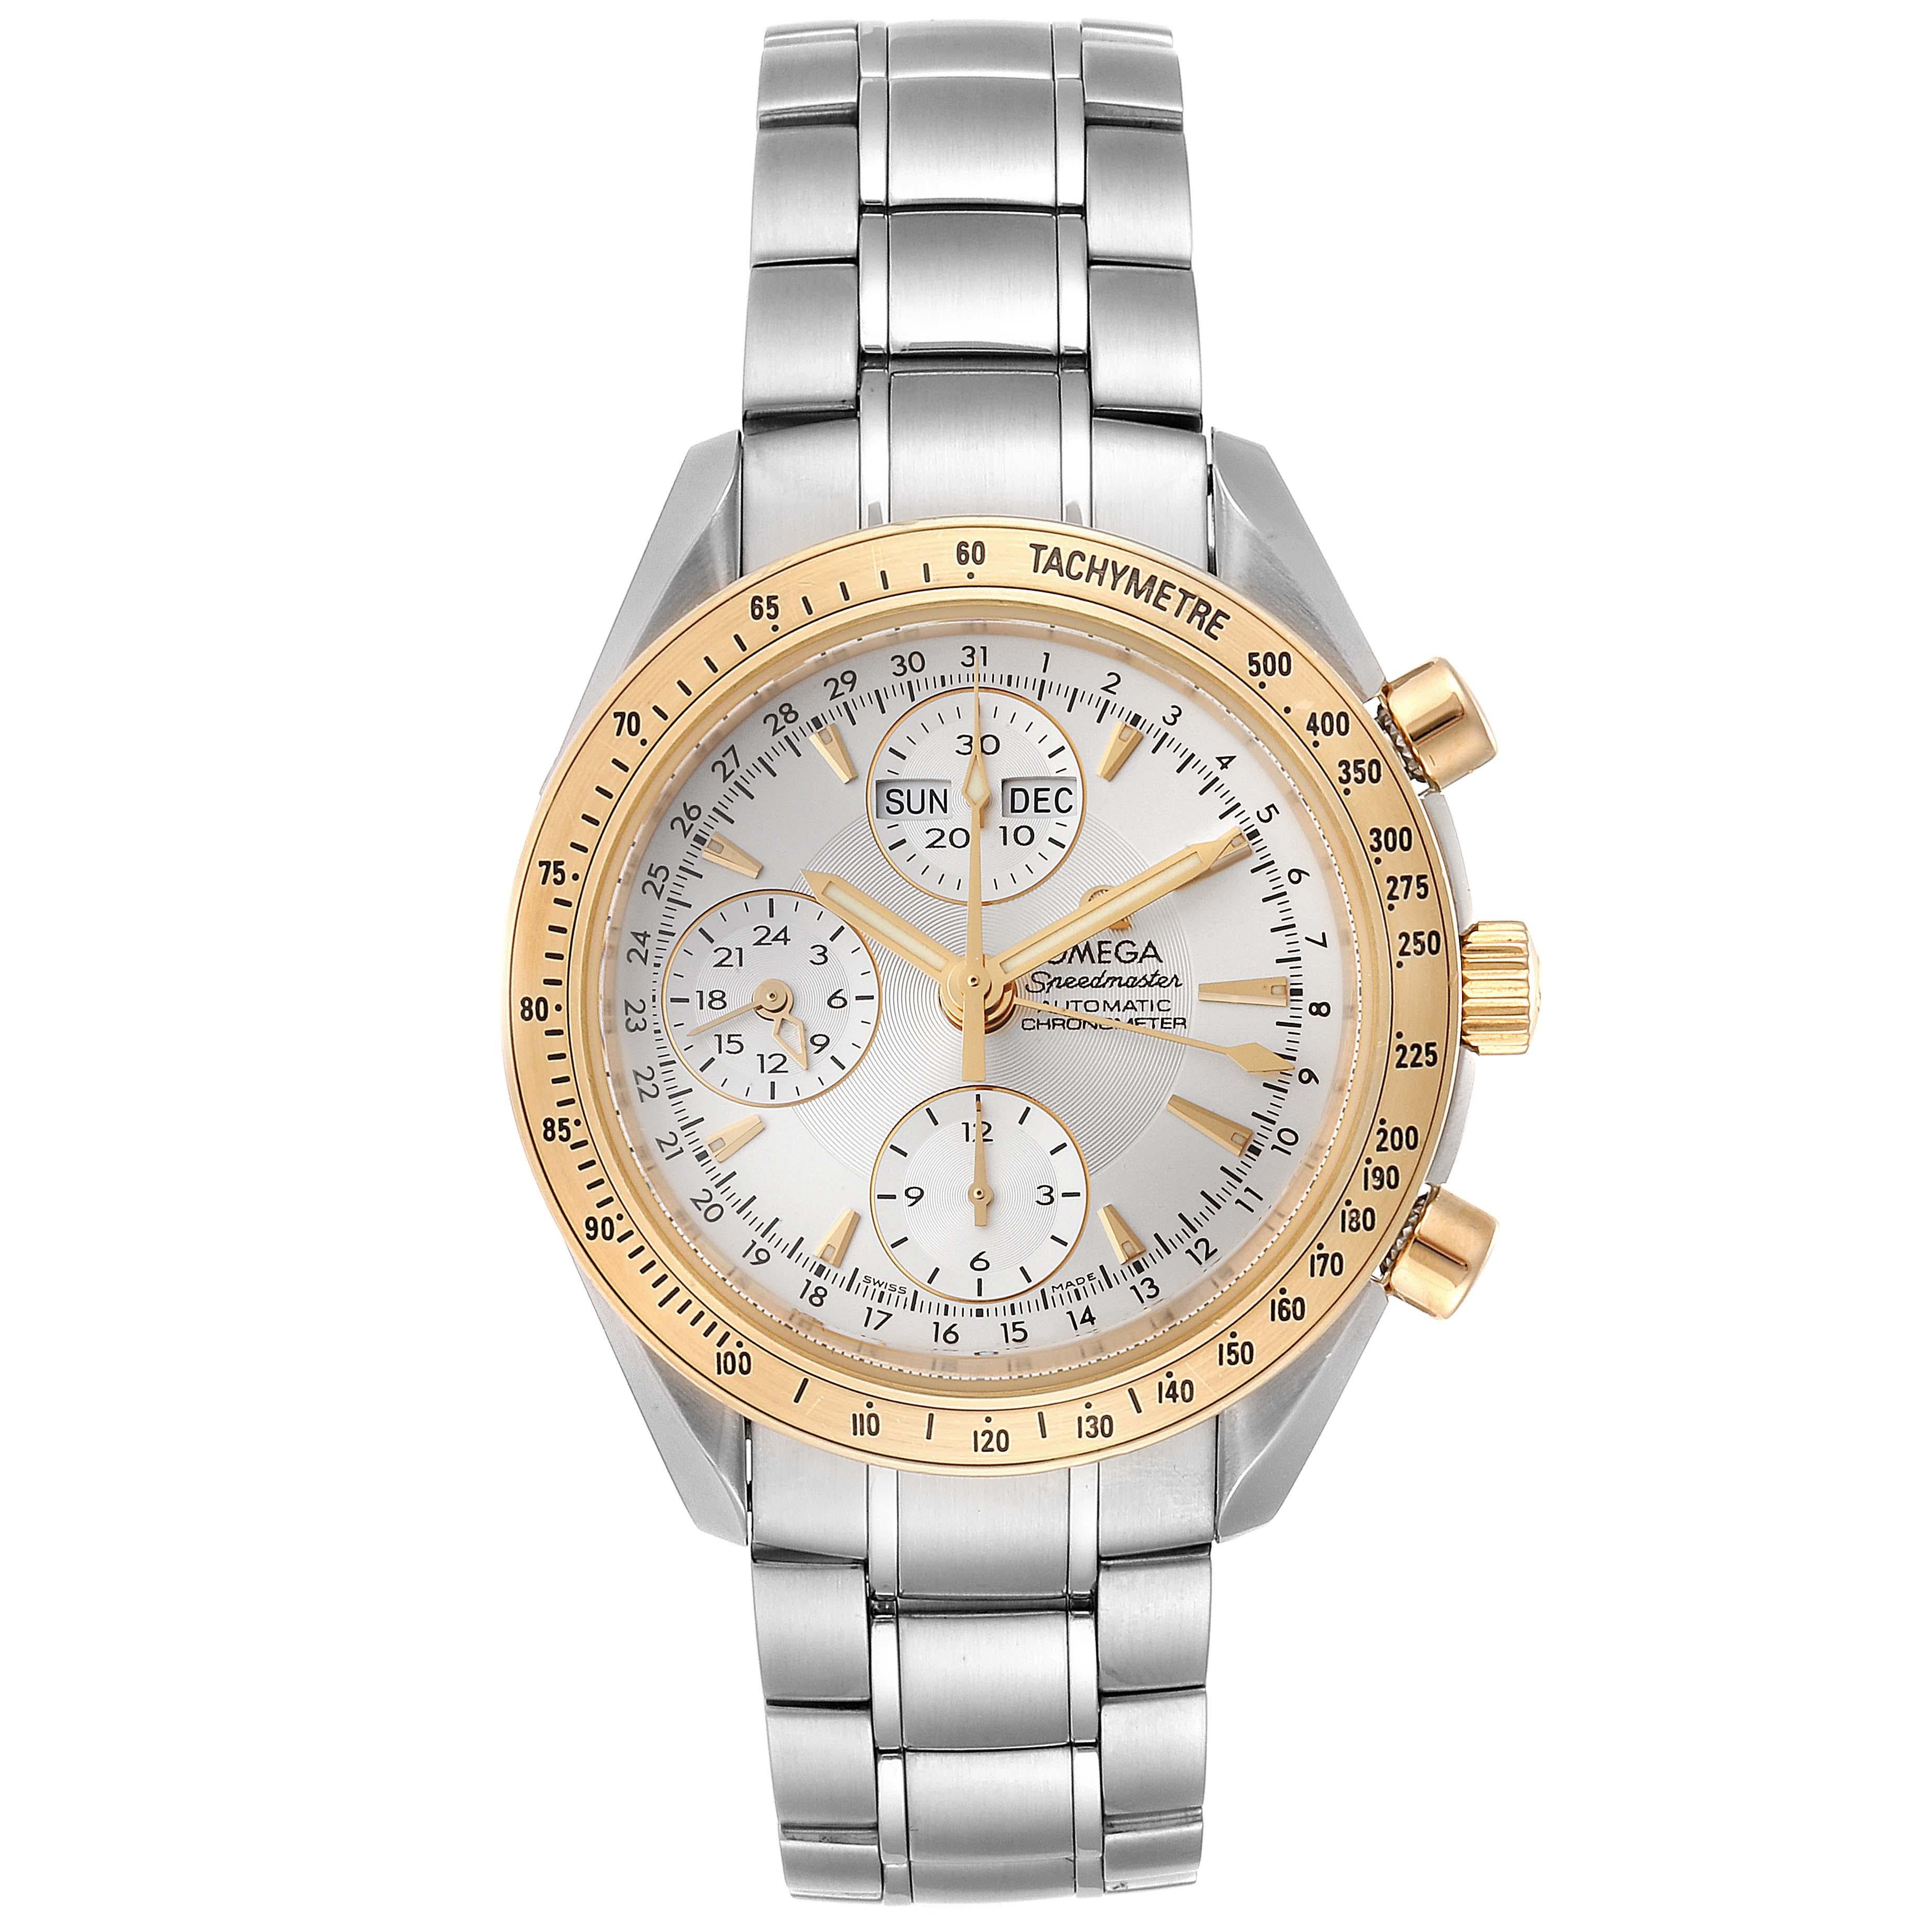 Omega Speedmaster Day Date Steel Yellow Gold Watch 323.21.40.44.02.001. Automatic self-winding chronograph movement. Caliber 3606. Stainless steel and 18K yellow gold round case 40mm in diameter. 18K yellow gold bezel with tachymetre function.